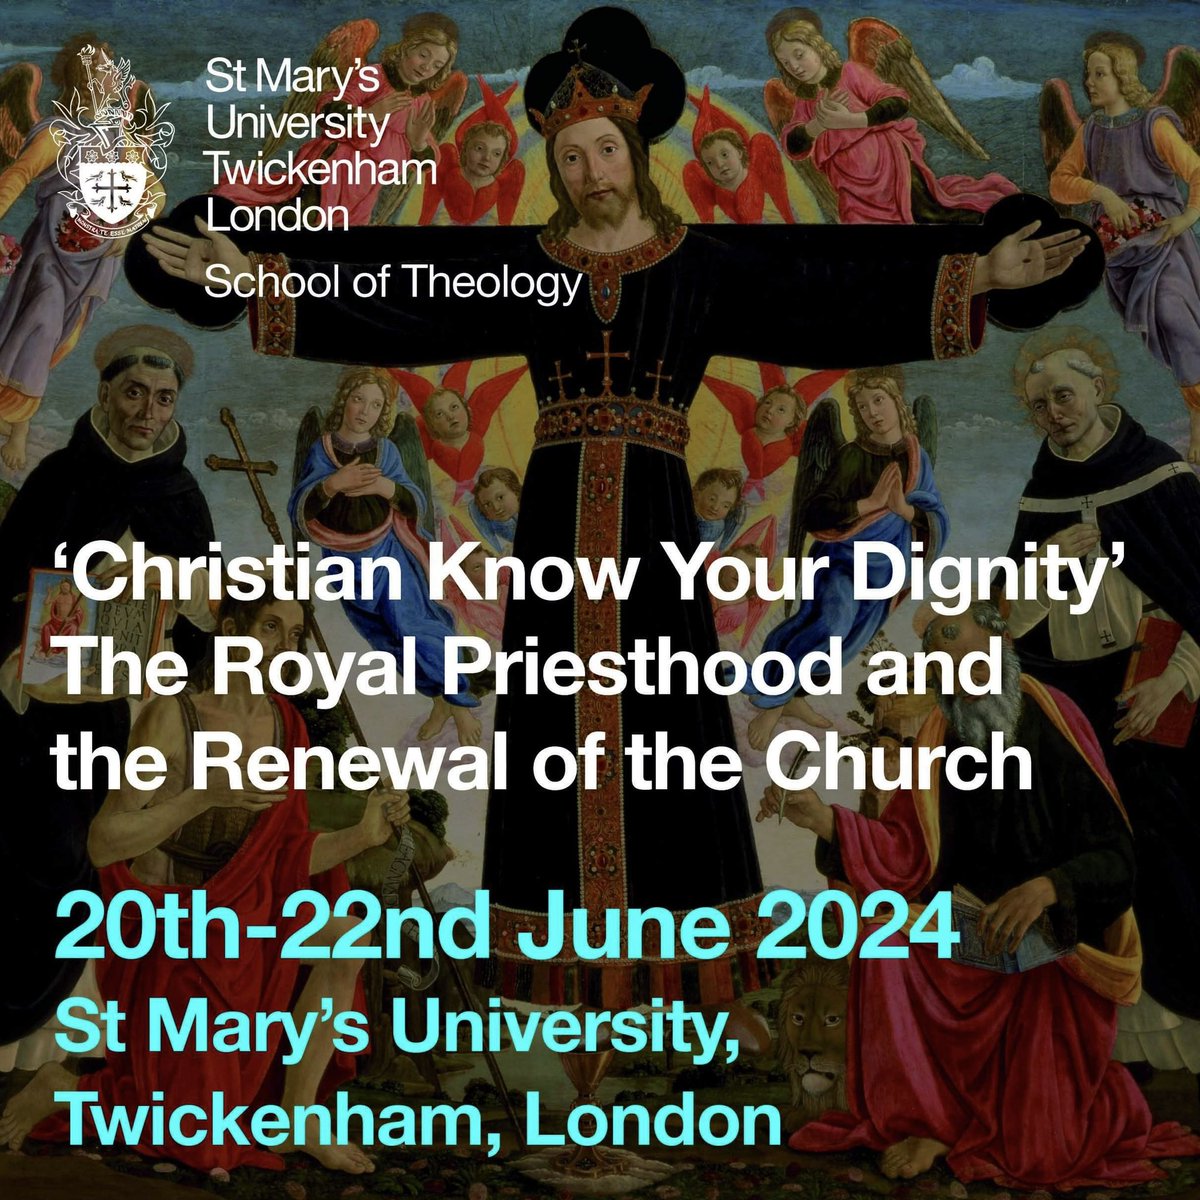 We’re holding the Royal Priesthood and Renewal of the Church International Conference at St Mary’s from Thursday 20th to Saturday 22nd June 2024. Find out more and book your tickets using the link below 👇 stmarys.ac.uk/events/2024/th…